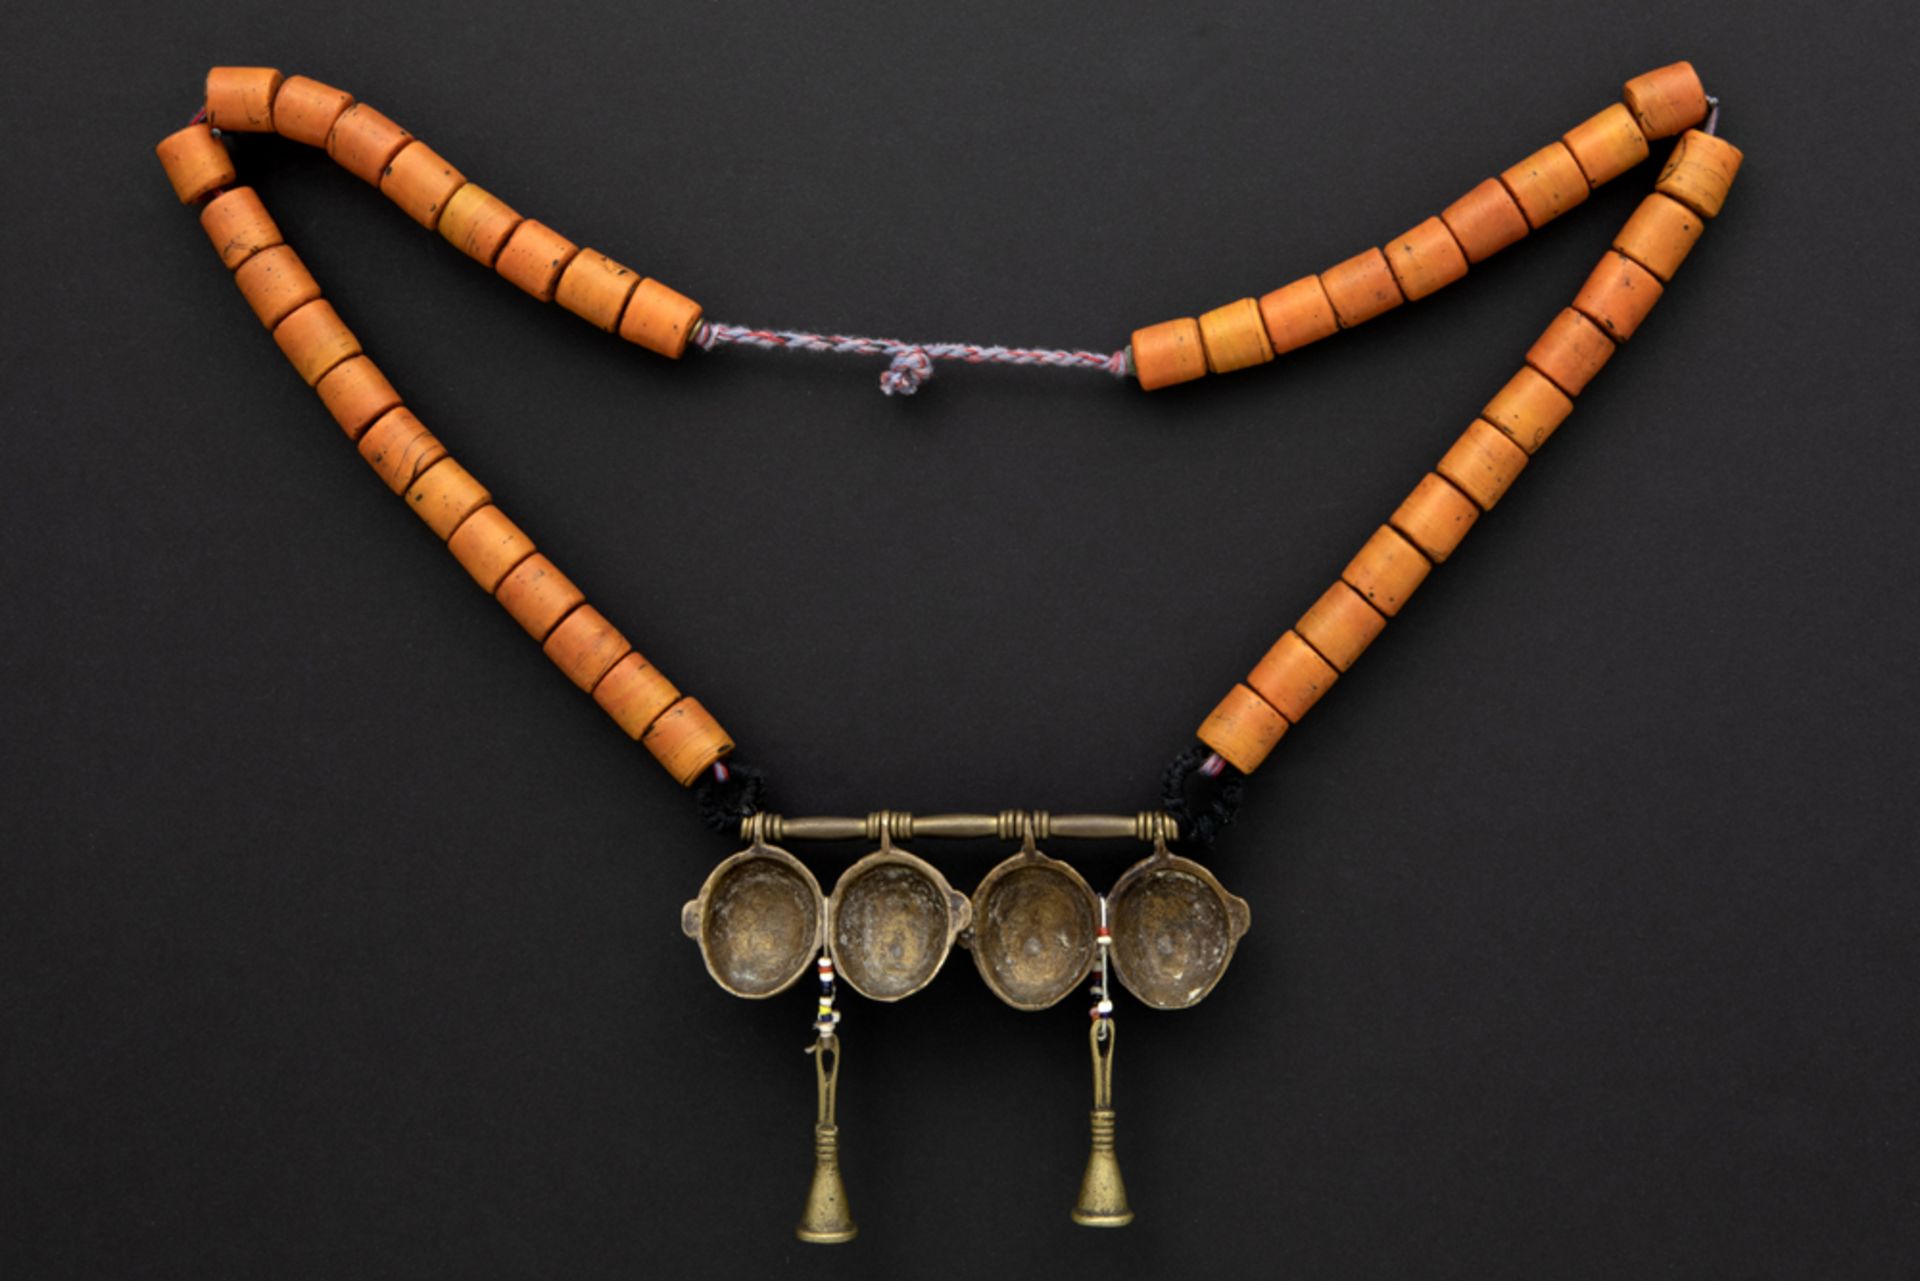 North Indian Naga necklace with beads and a wooden pendant with four bronze heads - Image 2 of 2